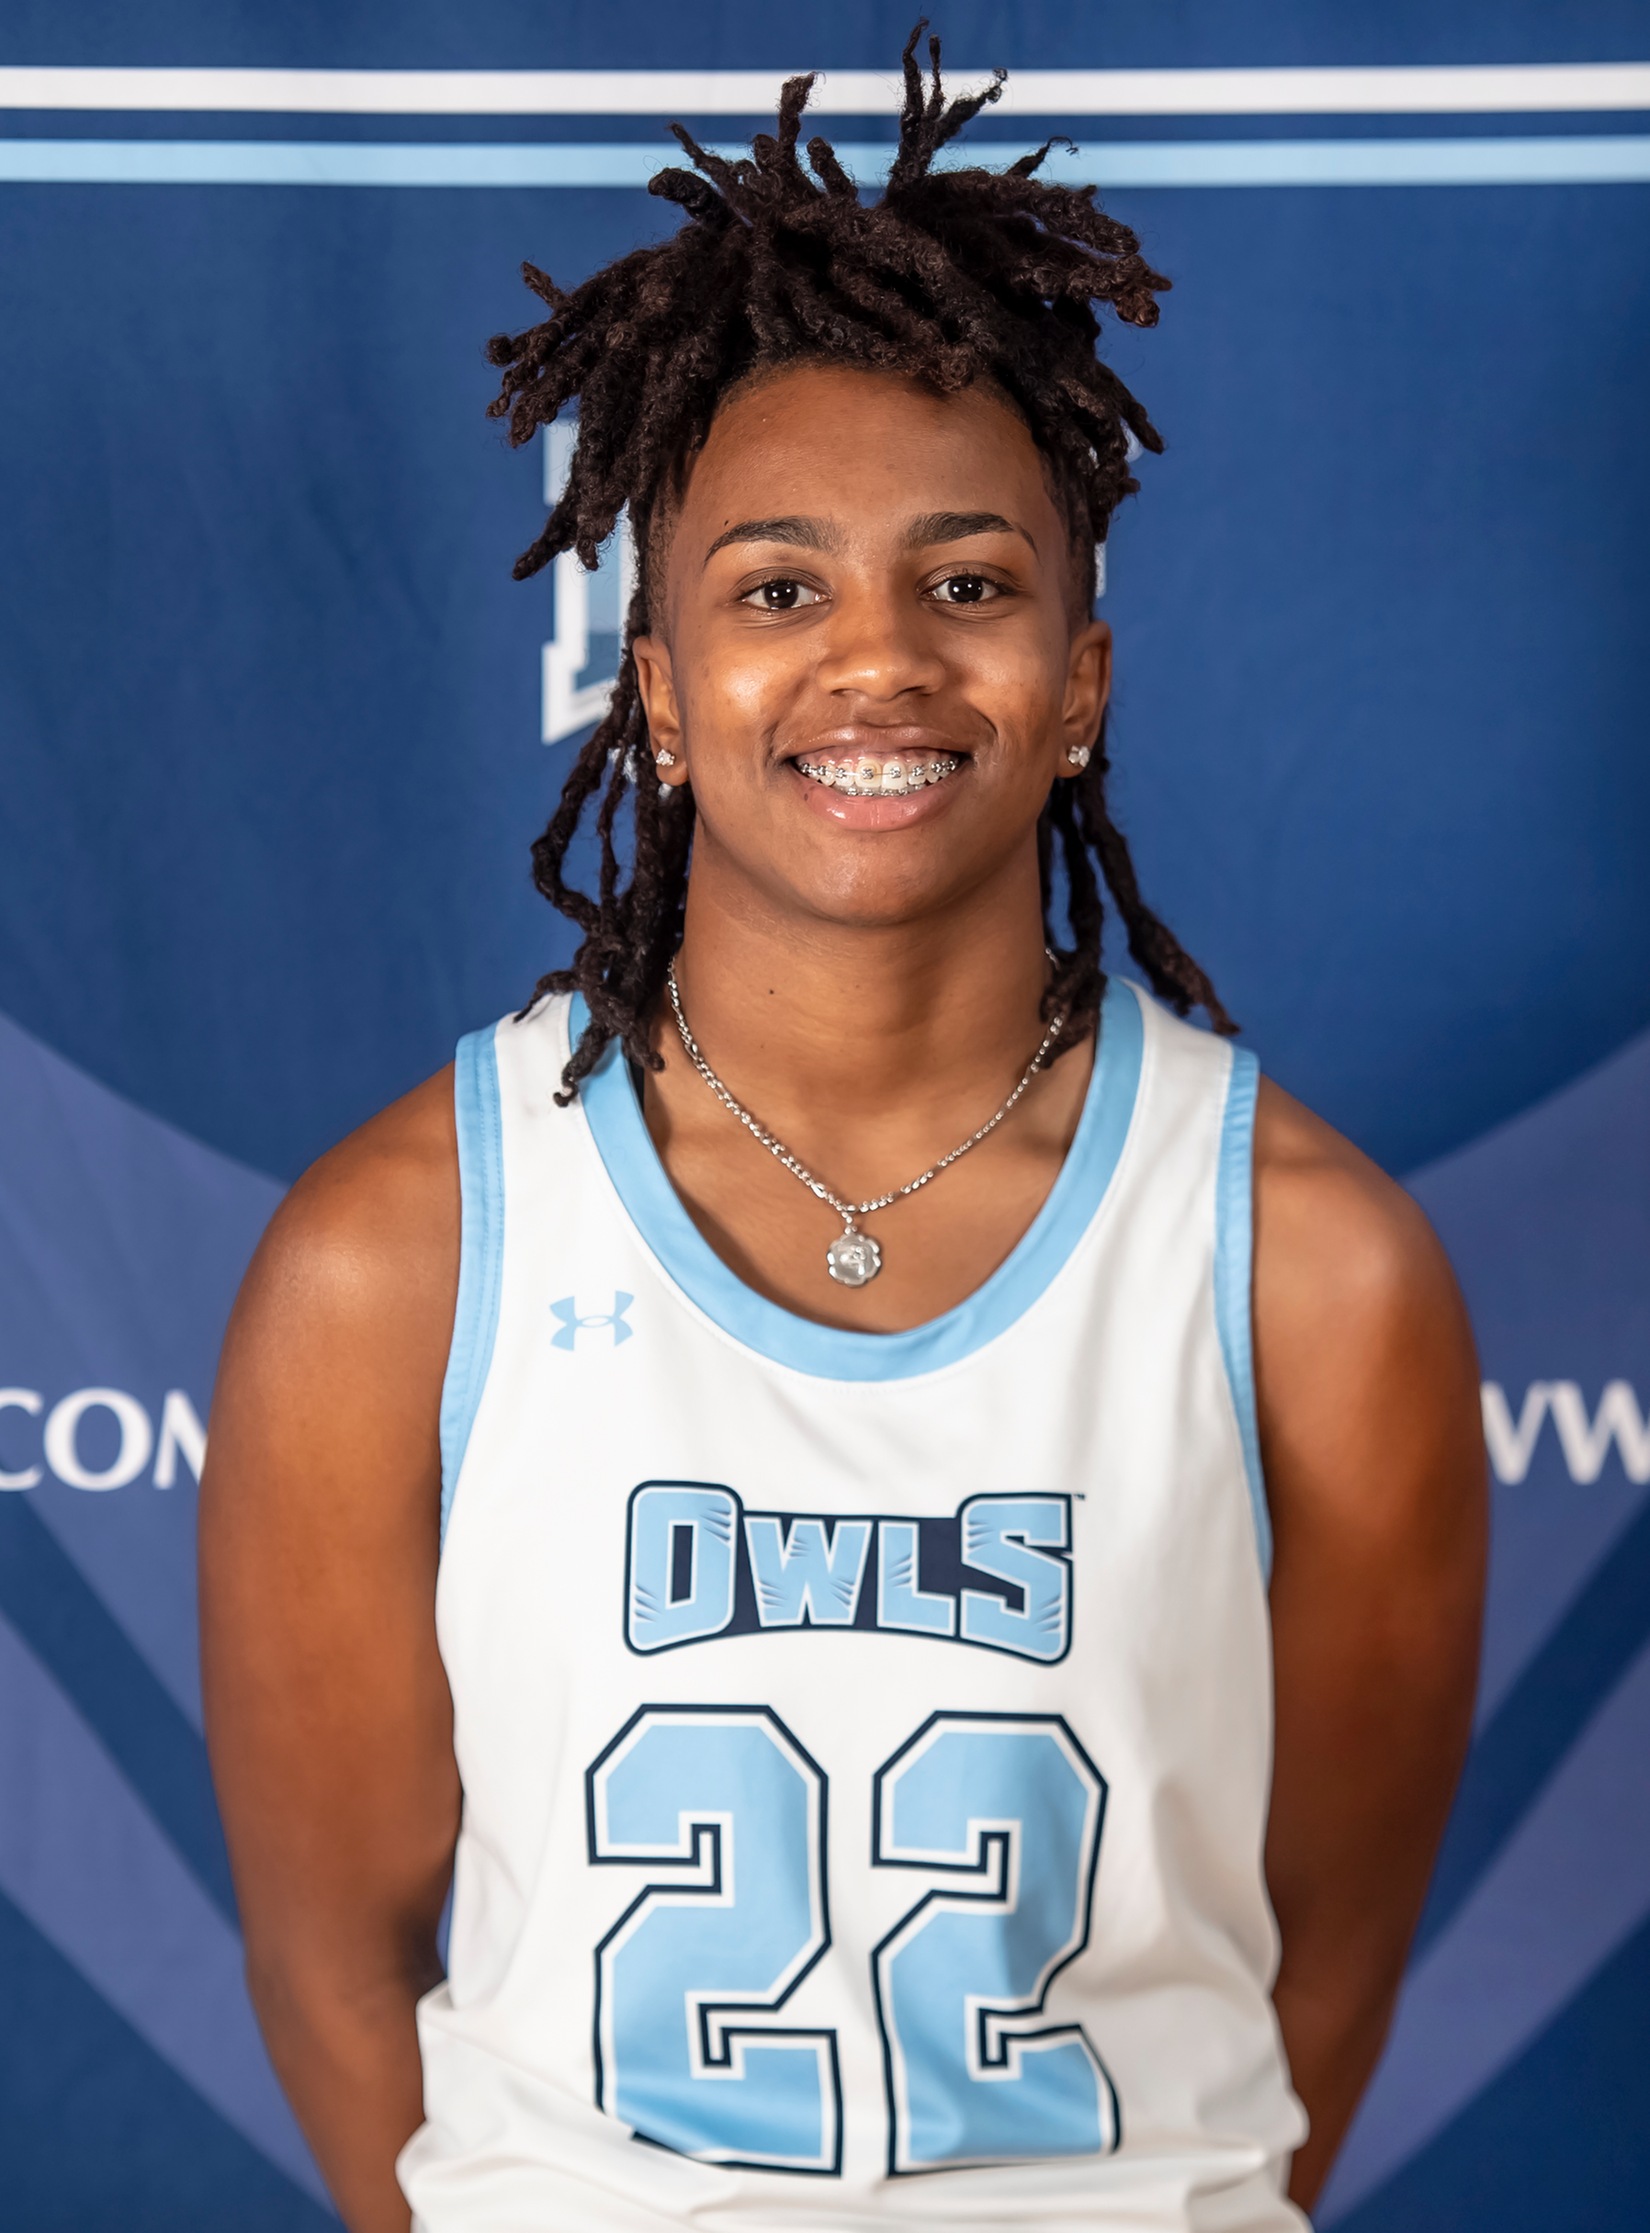 RaMyah Yearwood (Laurel, MD) finished Wednesday's 57-52 win over Garrett College with 12 points and 6 rebounds in her home collegiate debut.